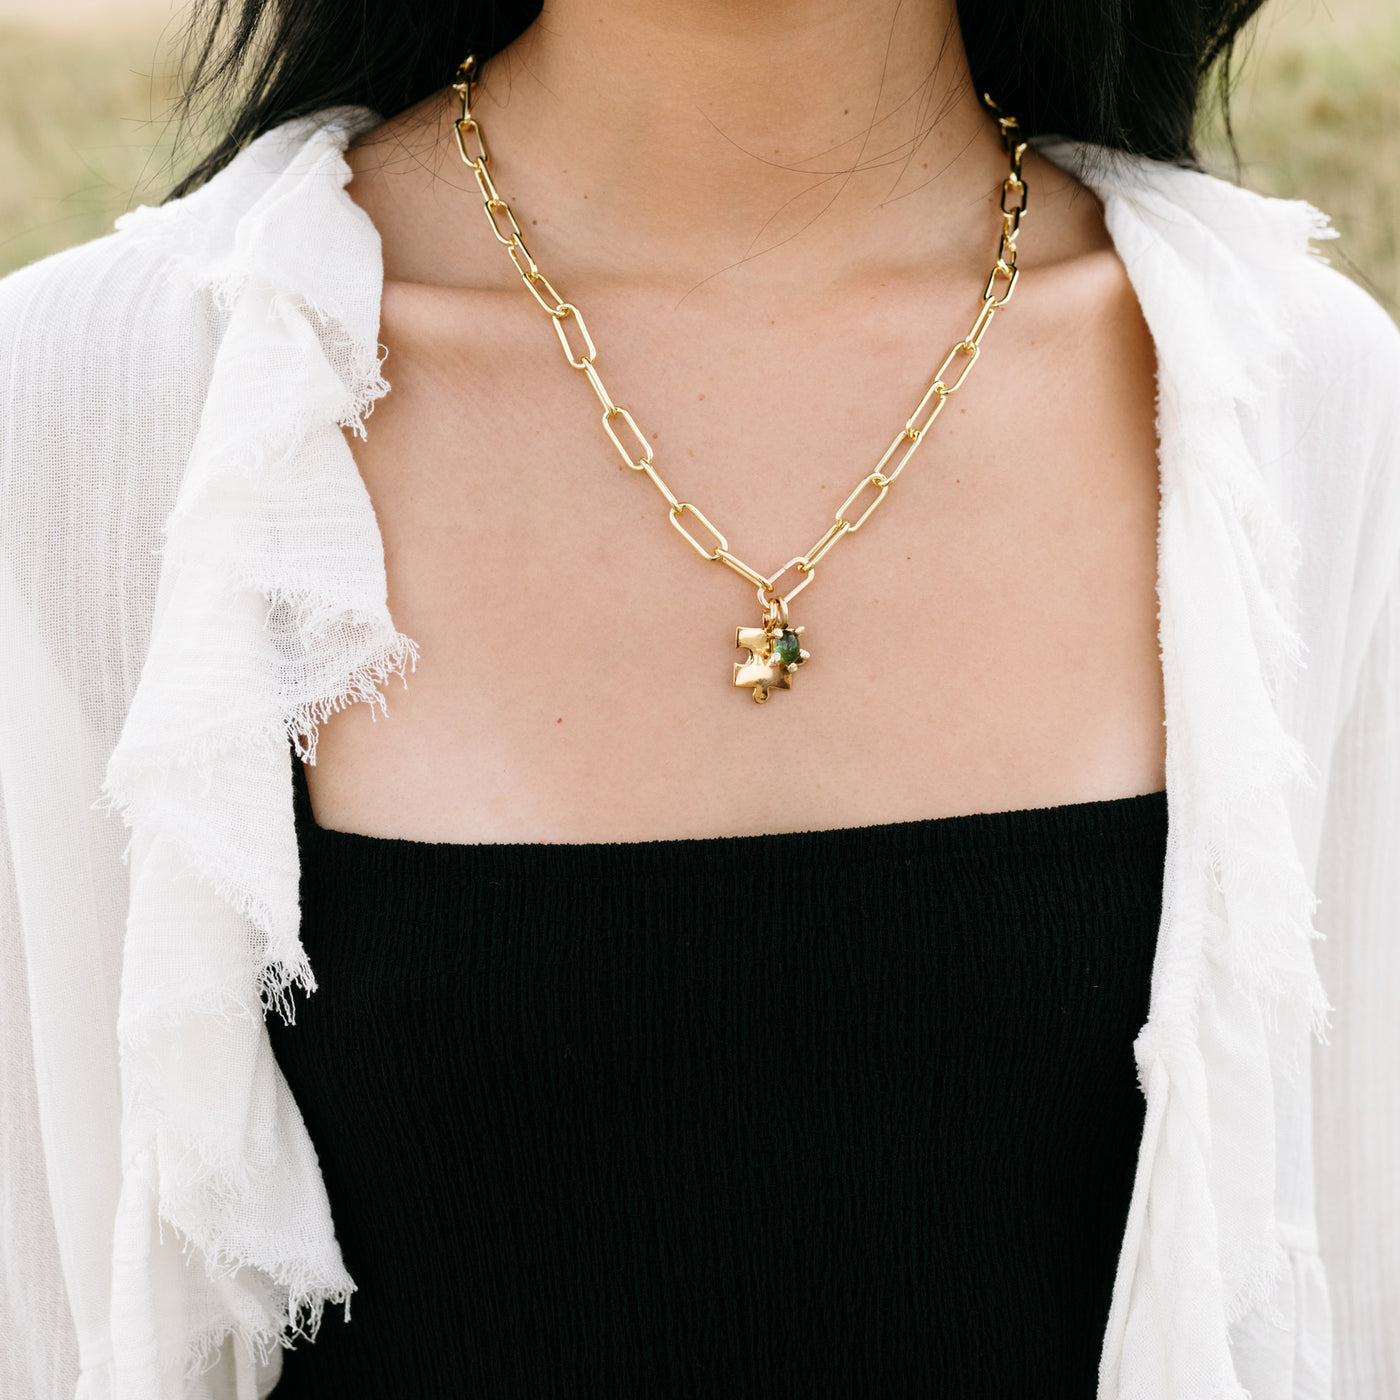 Puzzle piece necklace gold fill